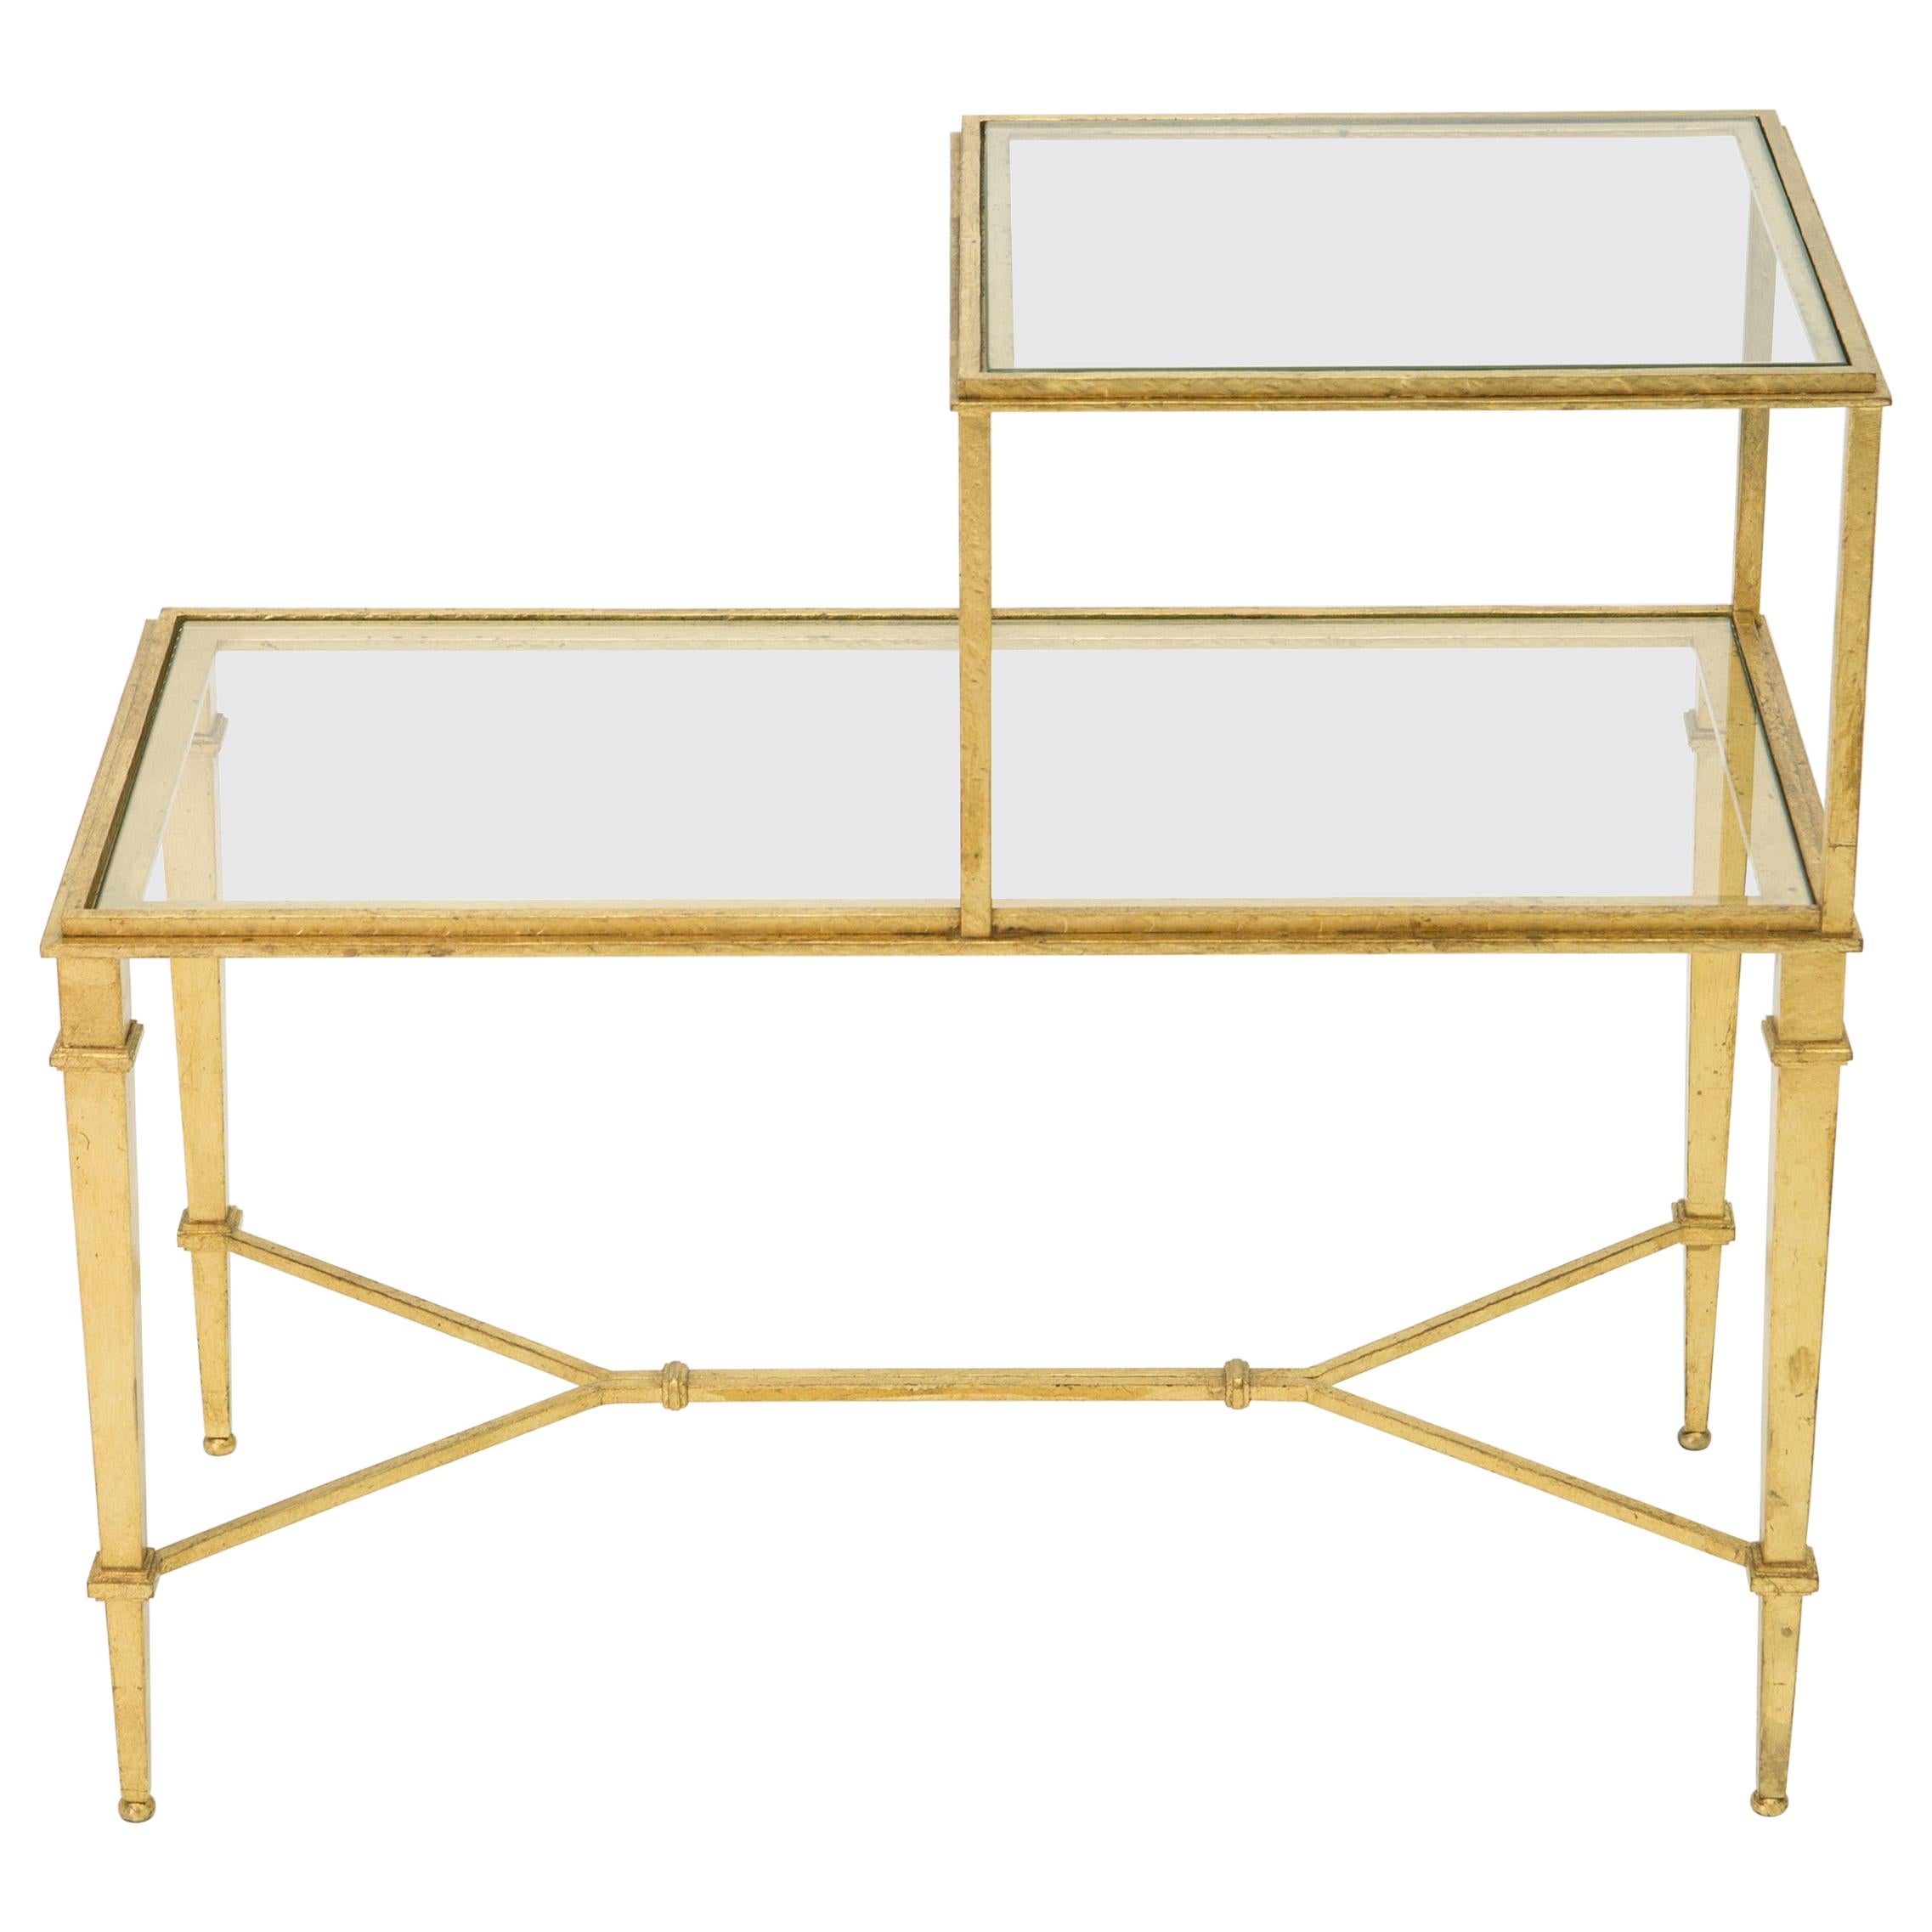 Roger Thibier Gilt Wrought Iron Glass Two-Tier End Table 1960s